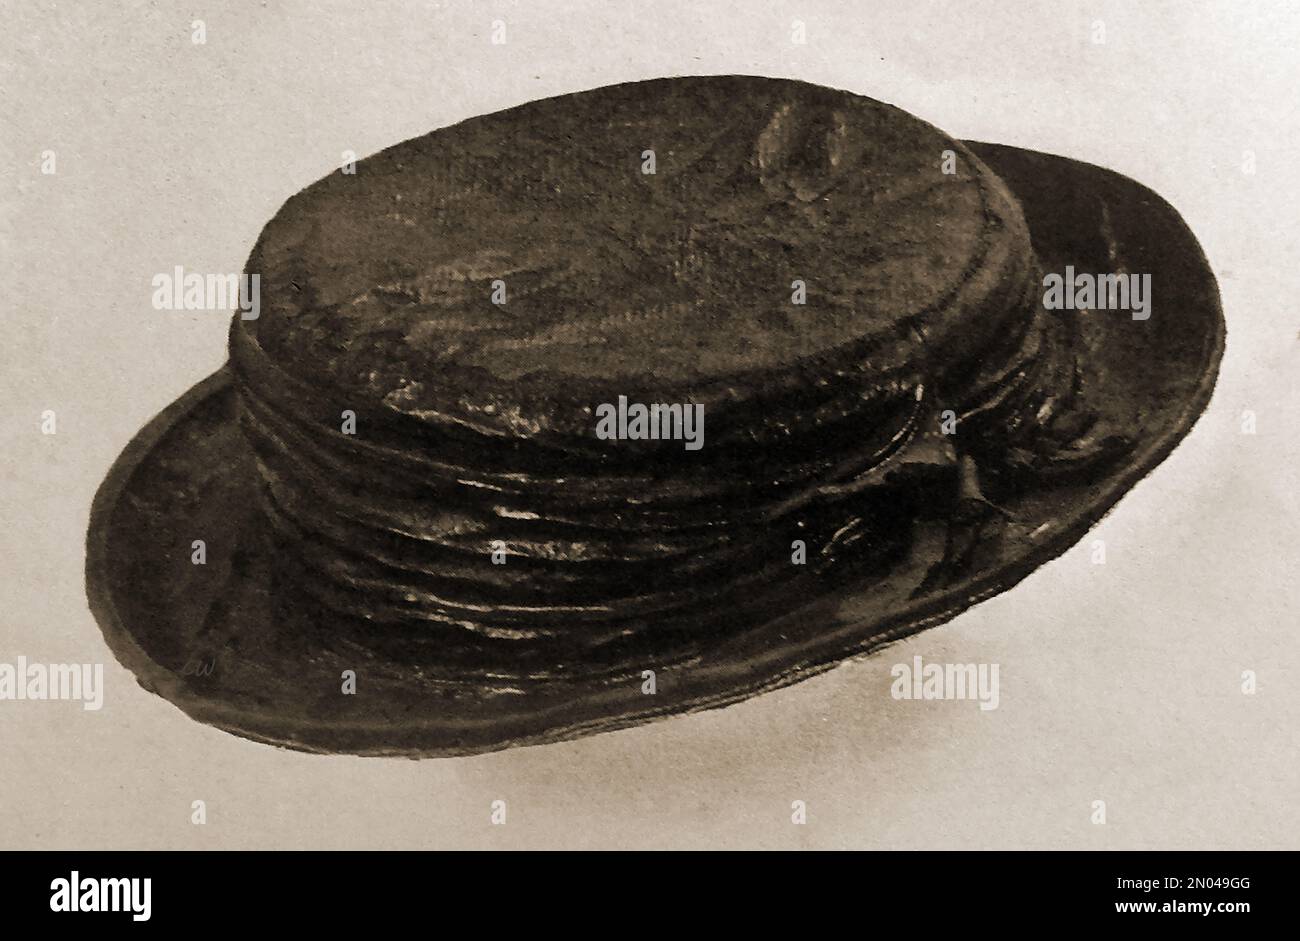 British pubs inns & taverns - A circa 1940 old photograph of an 18th century sailor's hat found in the bombed out roof space of the George at Portsmouth in WWII.jpg - 2N04 Stock Photo